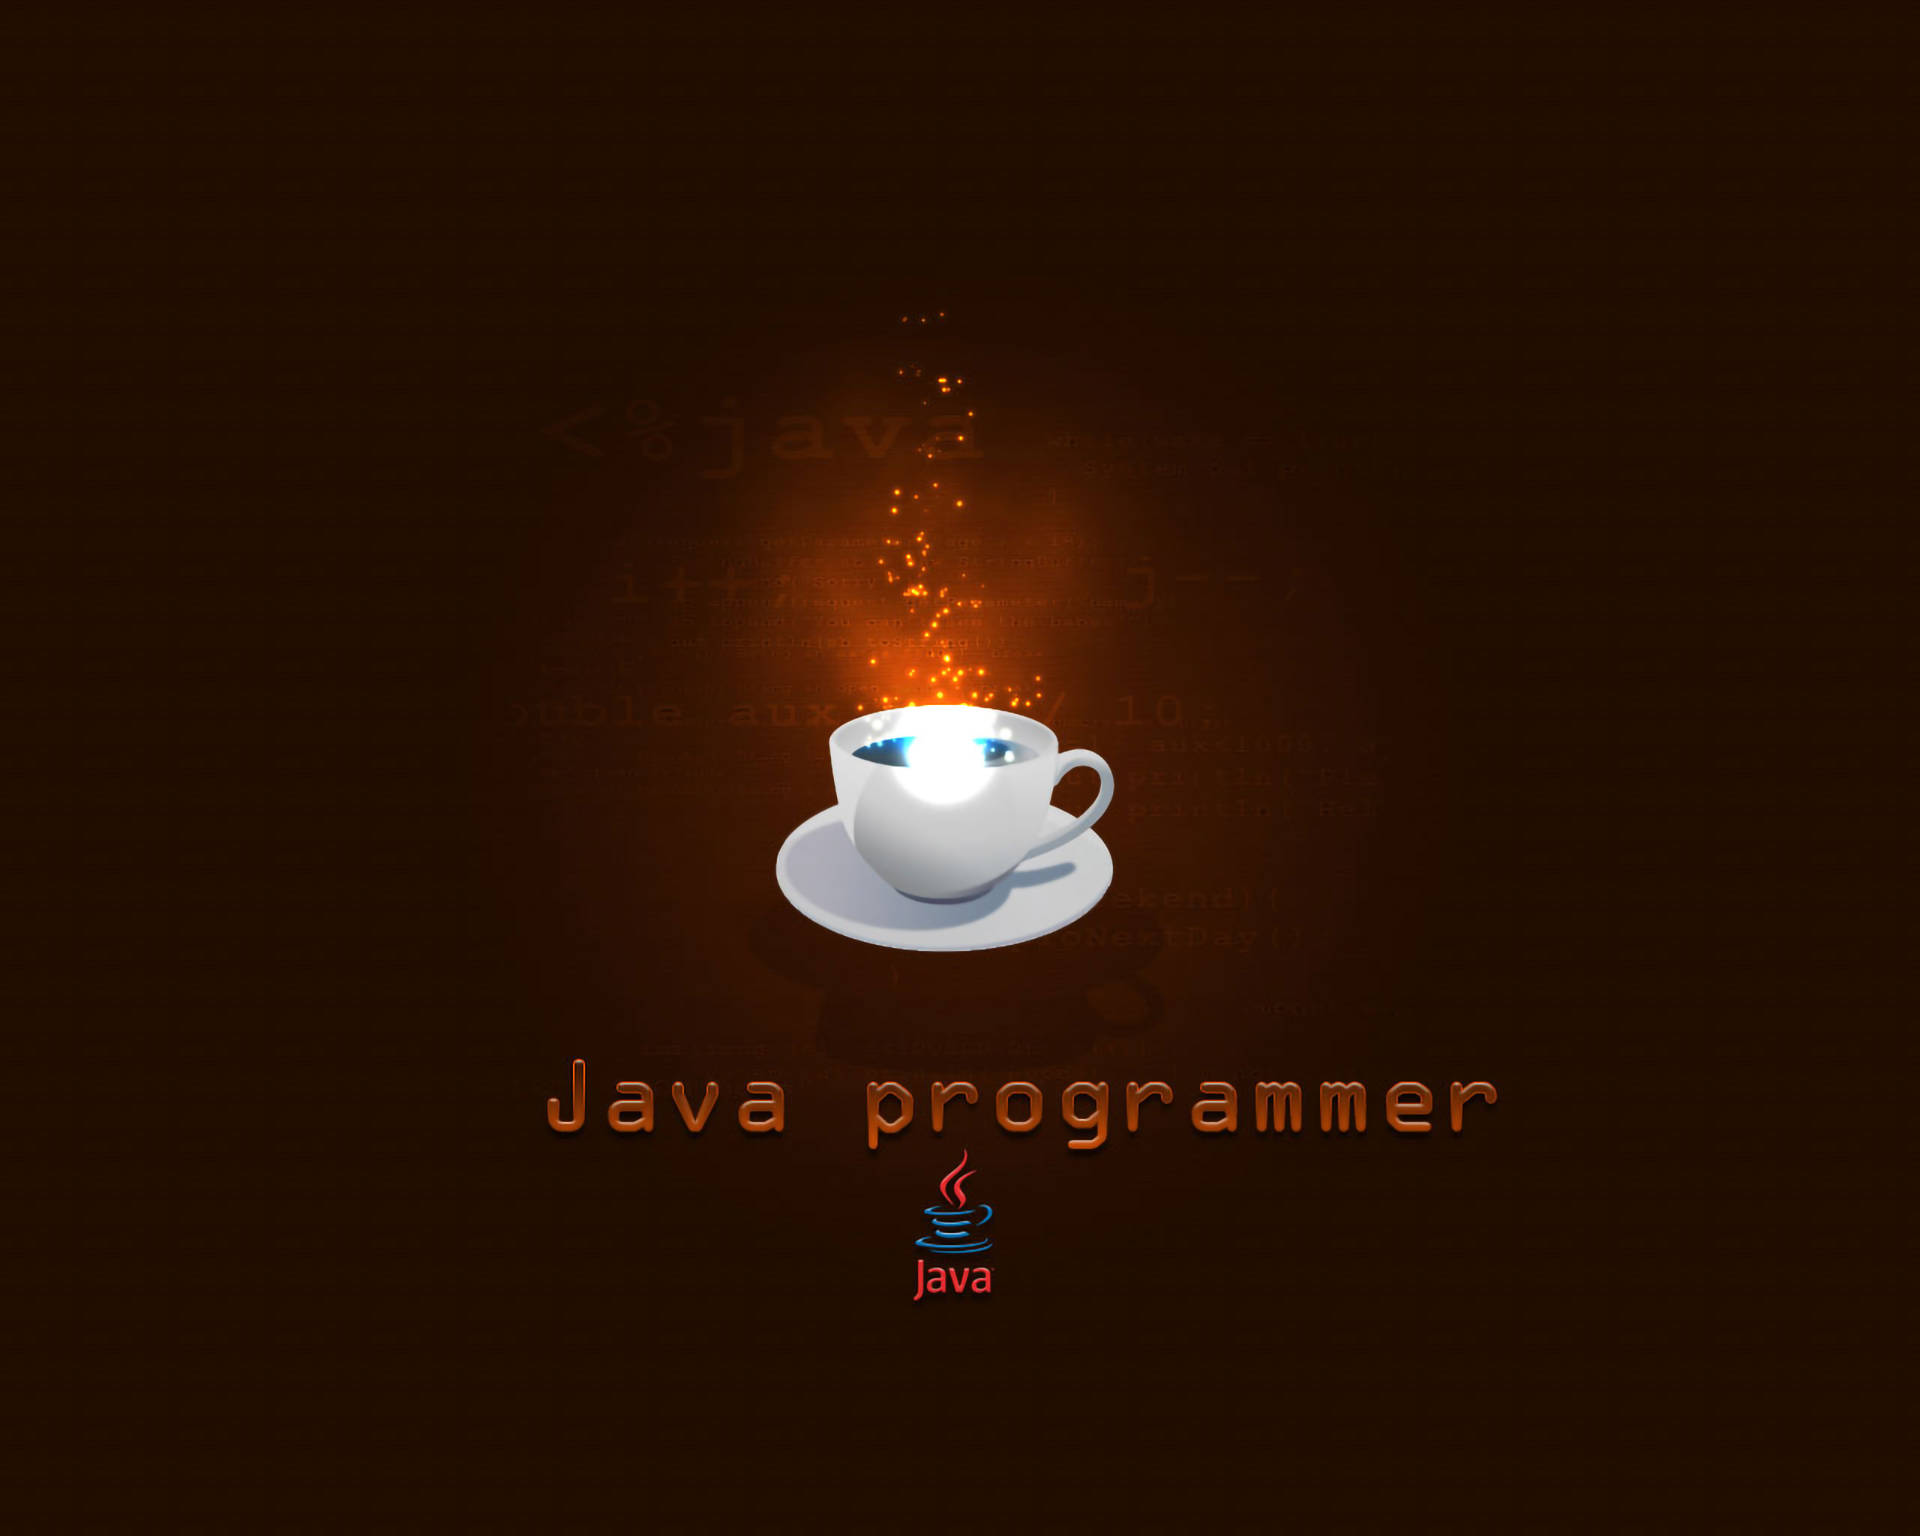 Java Programming With Glowing Cup Background